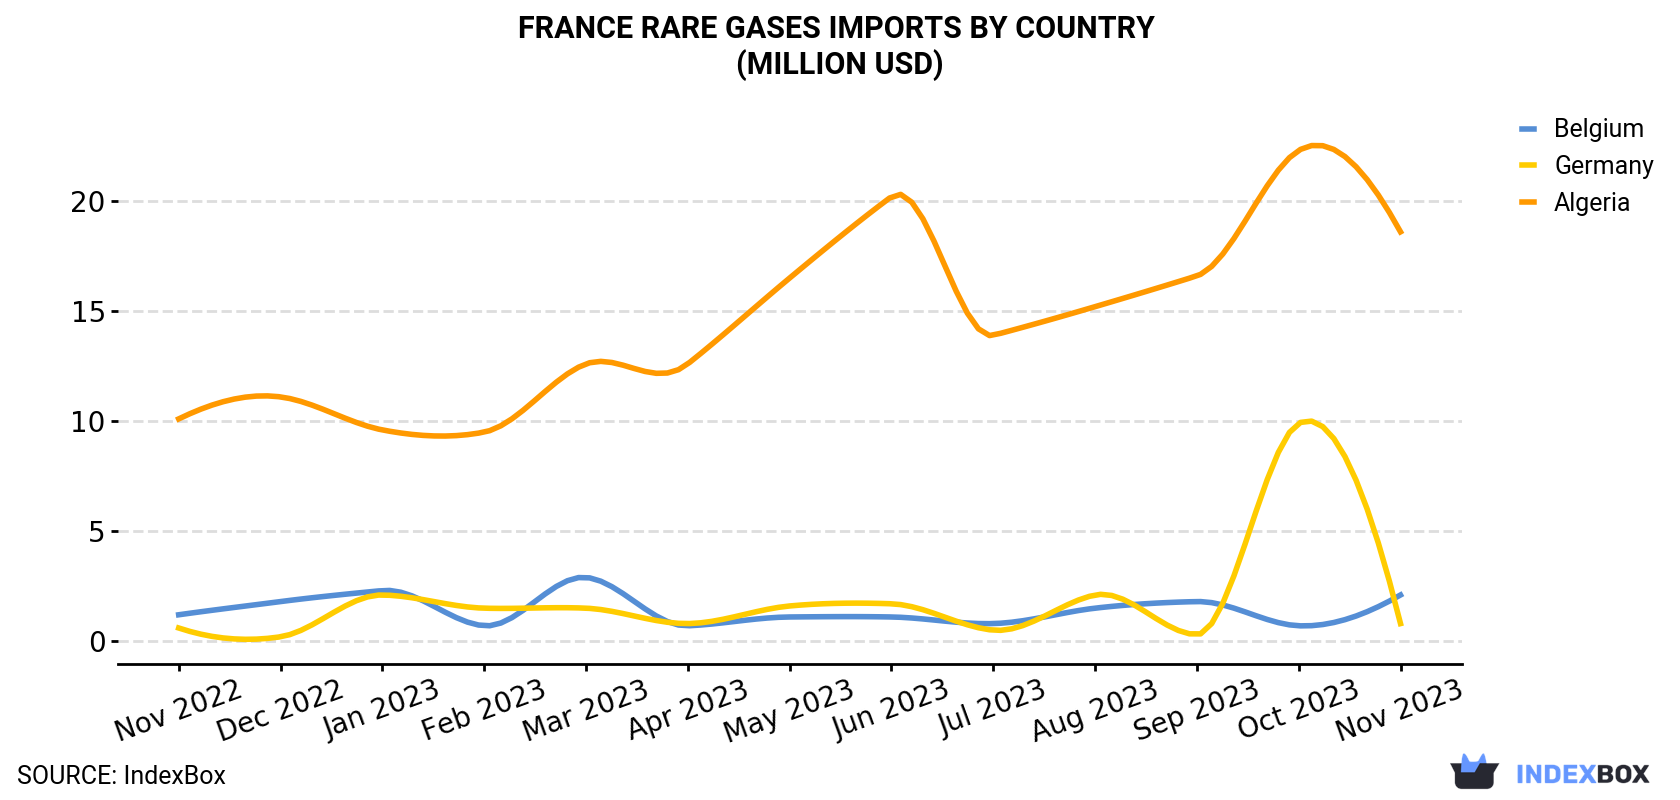 France Rare Gases Imports By Country (Million USD)